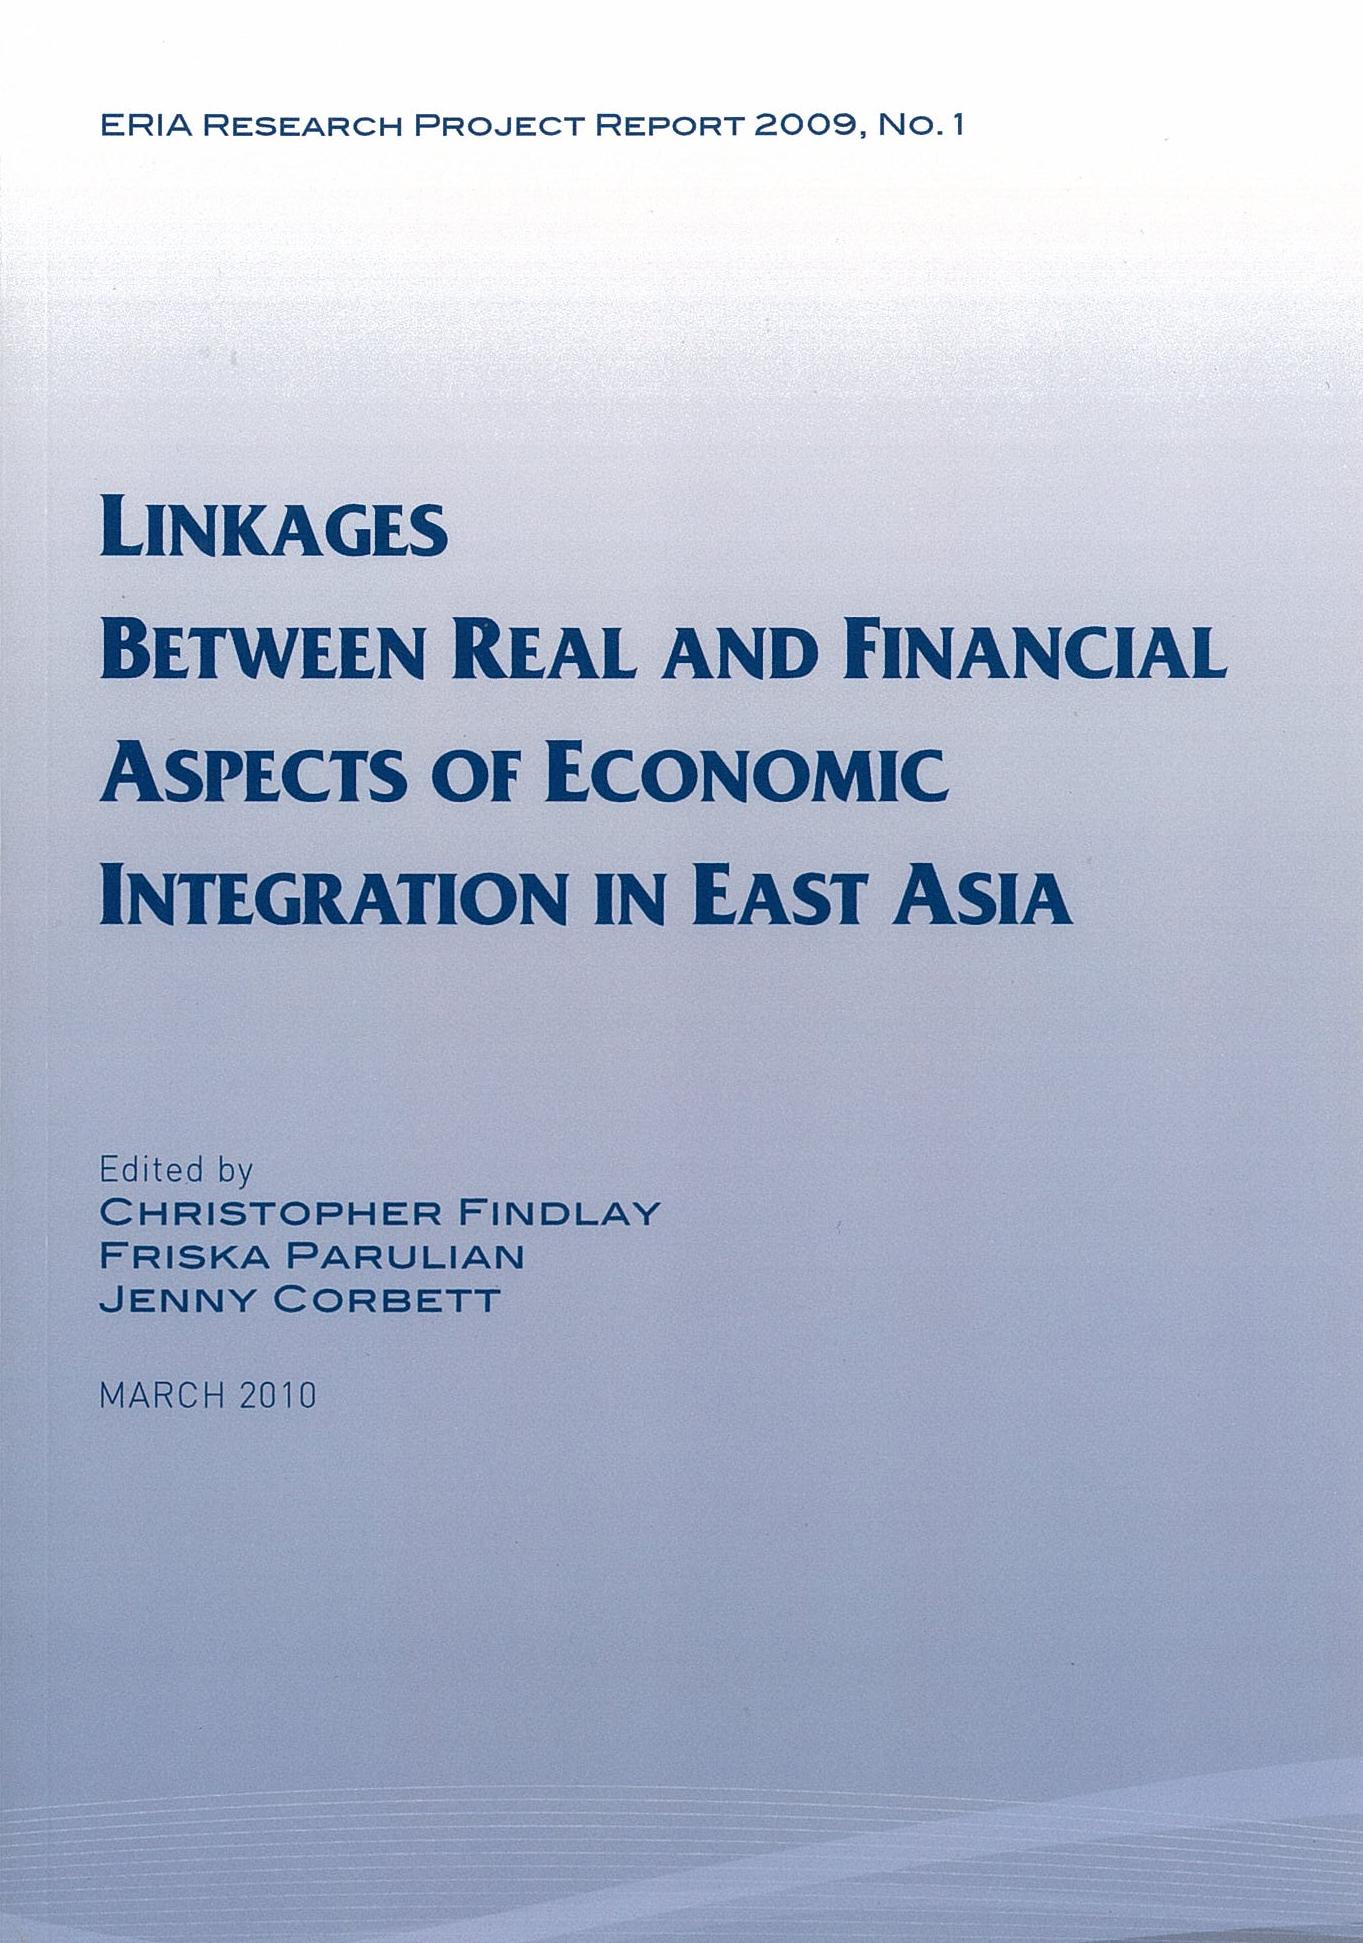 Linkages between Real and Financial Aspects of Economic Integration in East Asia